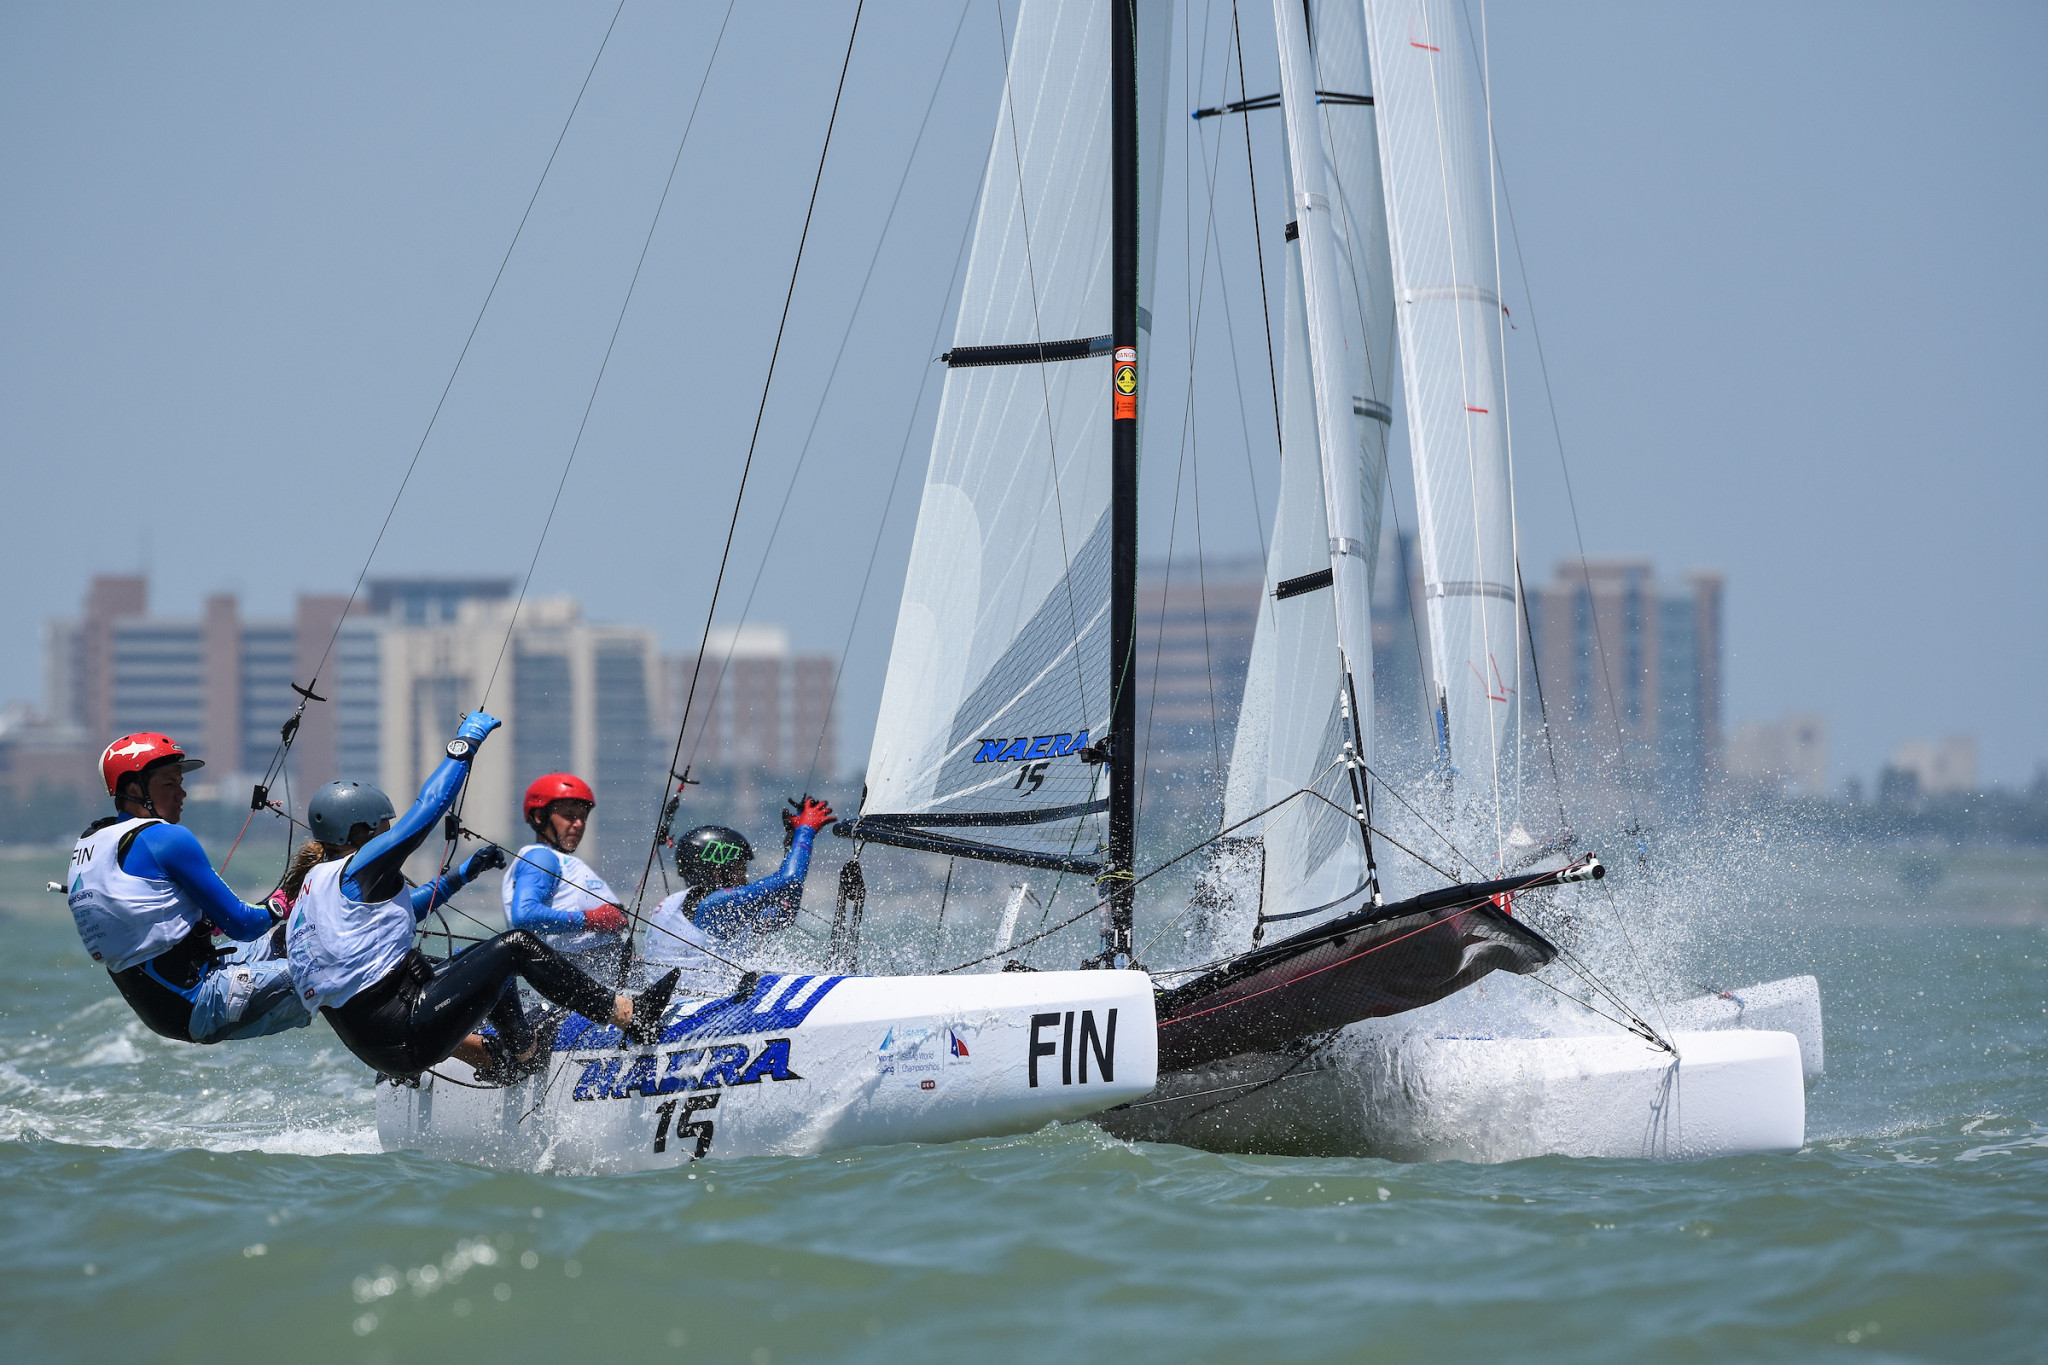 The Hague set to host 2021 Youth Sailing World Championships as no bids received for 2022 event